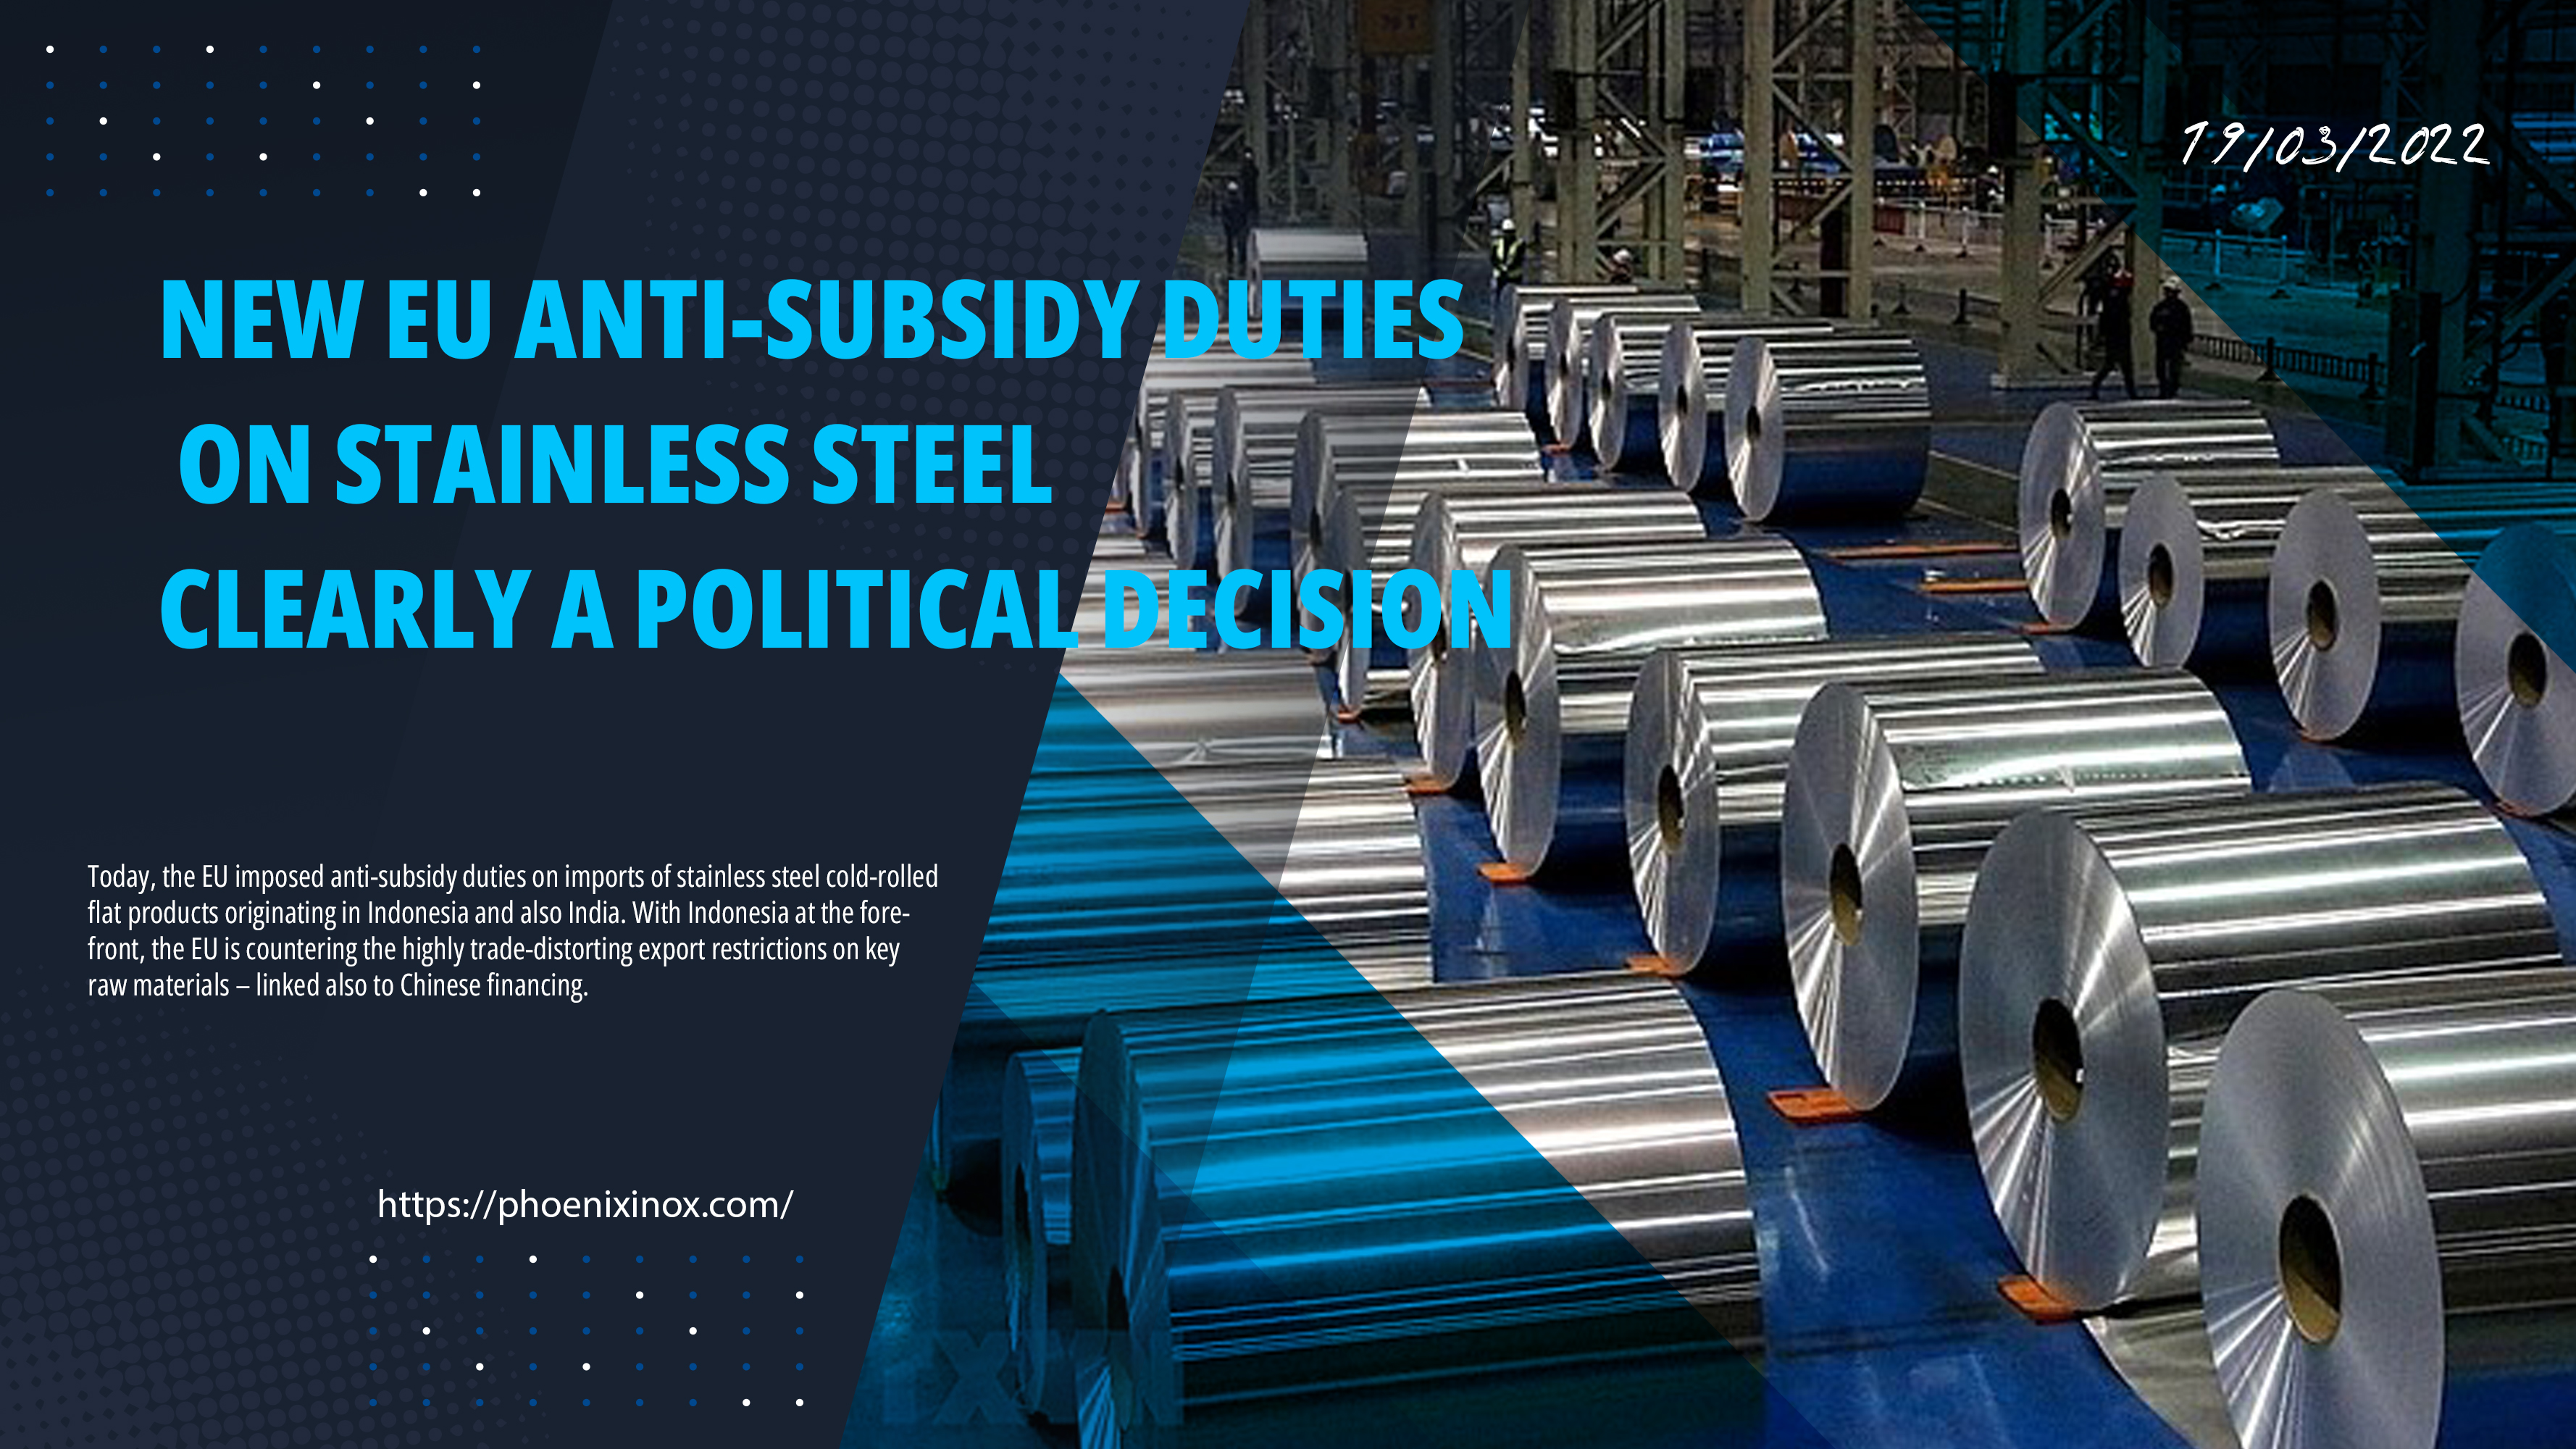 NEW EU ANTI-SUBSIDY DUTIES ON STAINLESS STEEL CLEARLY A POLITICAL DECISION